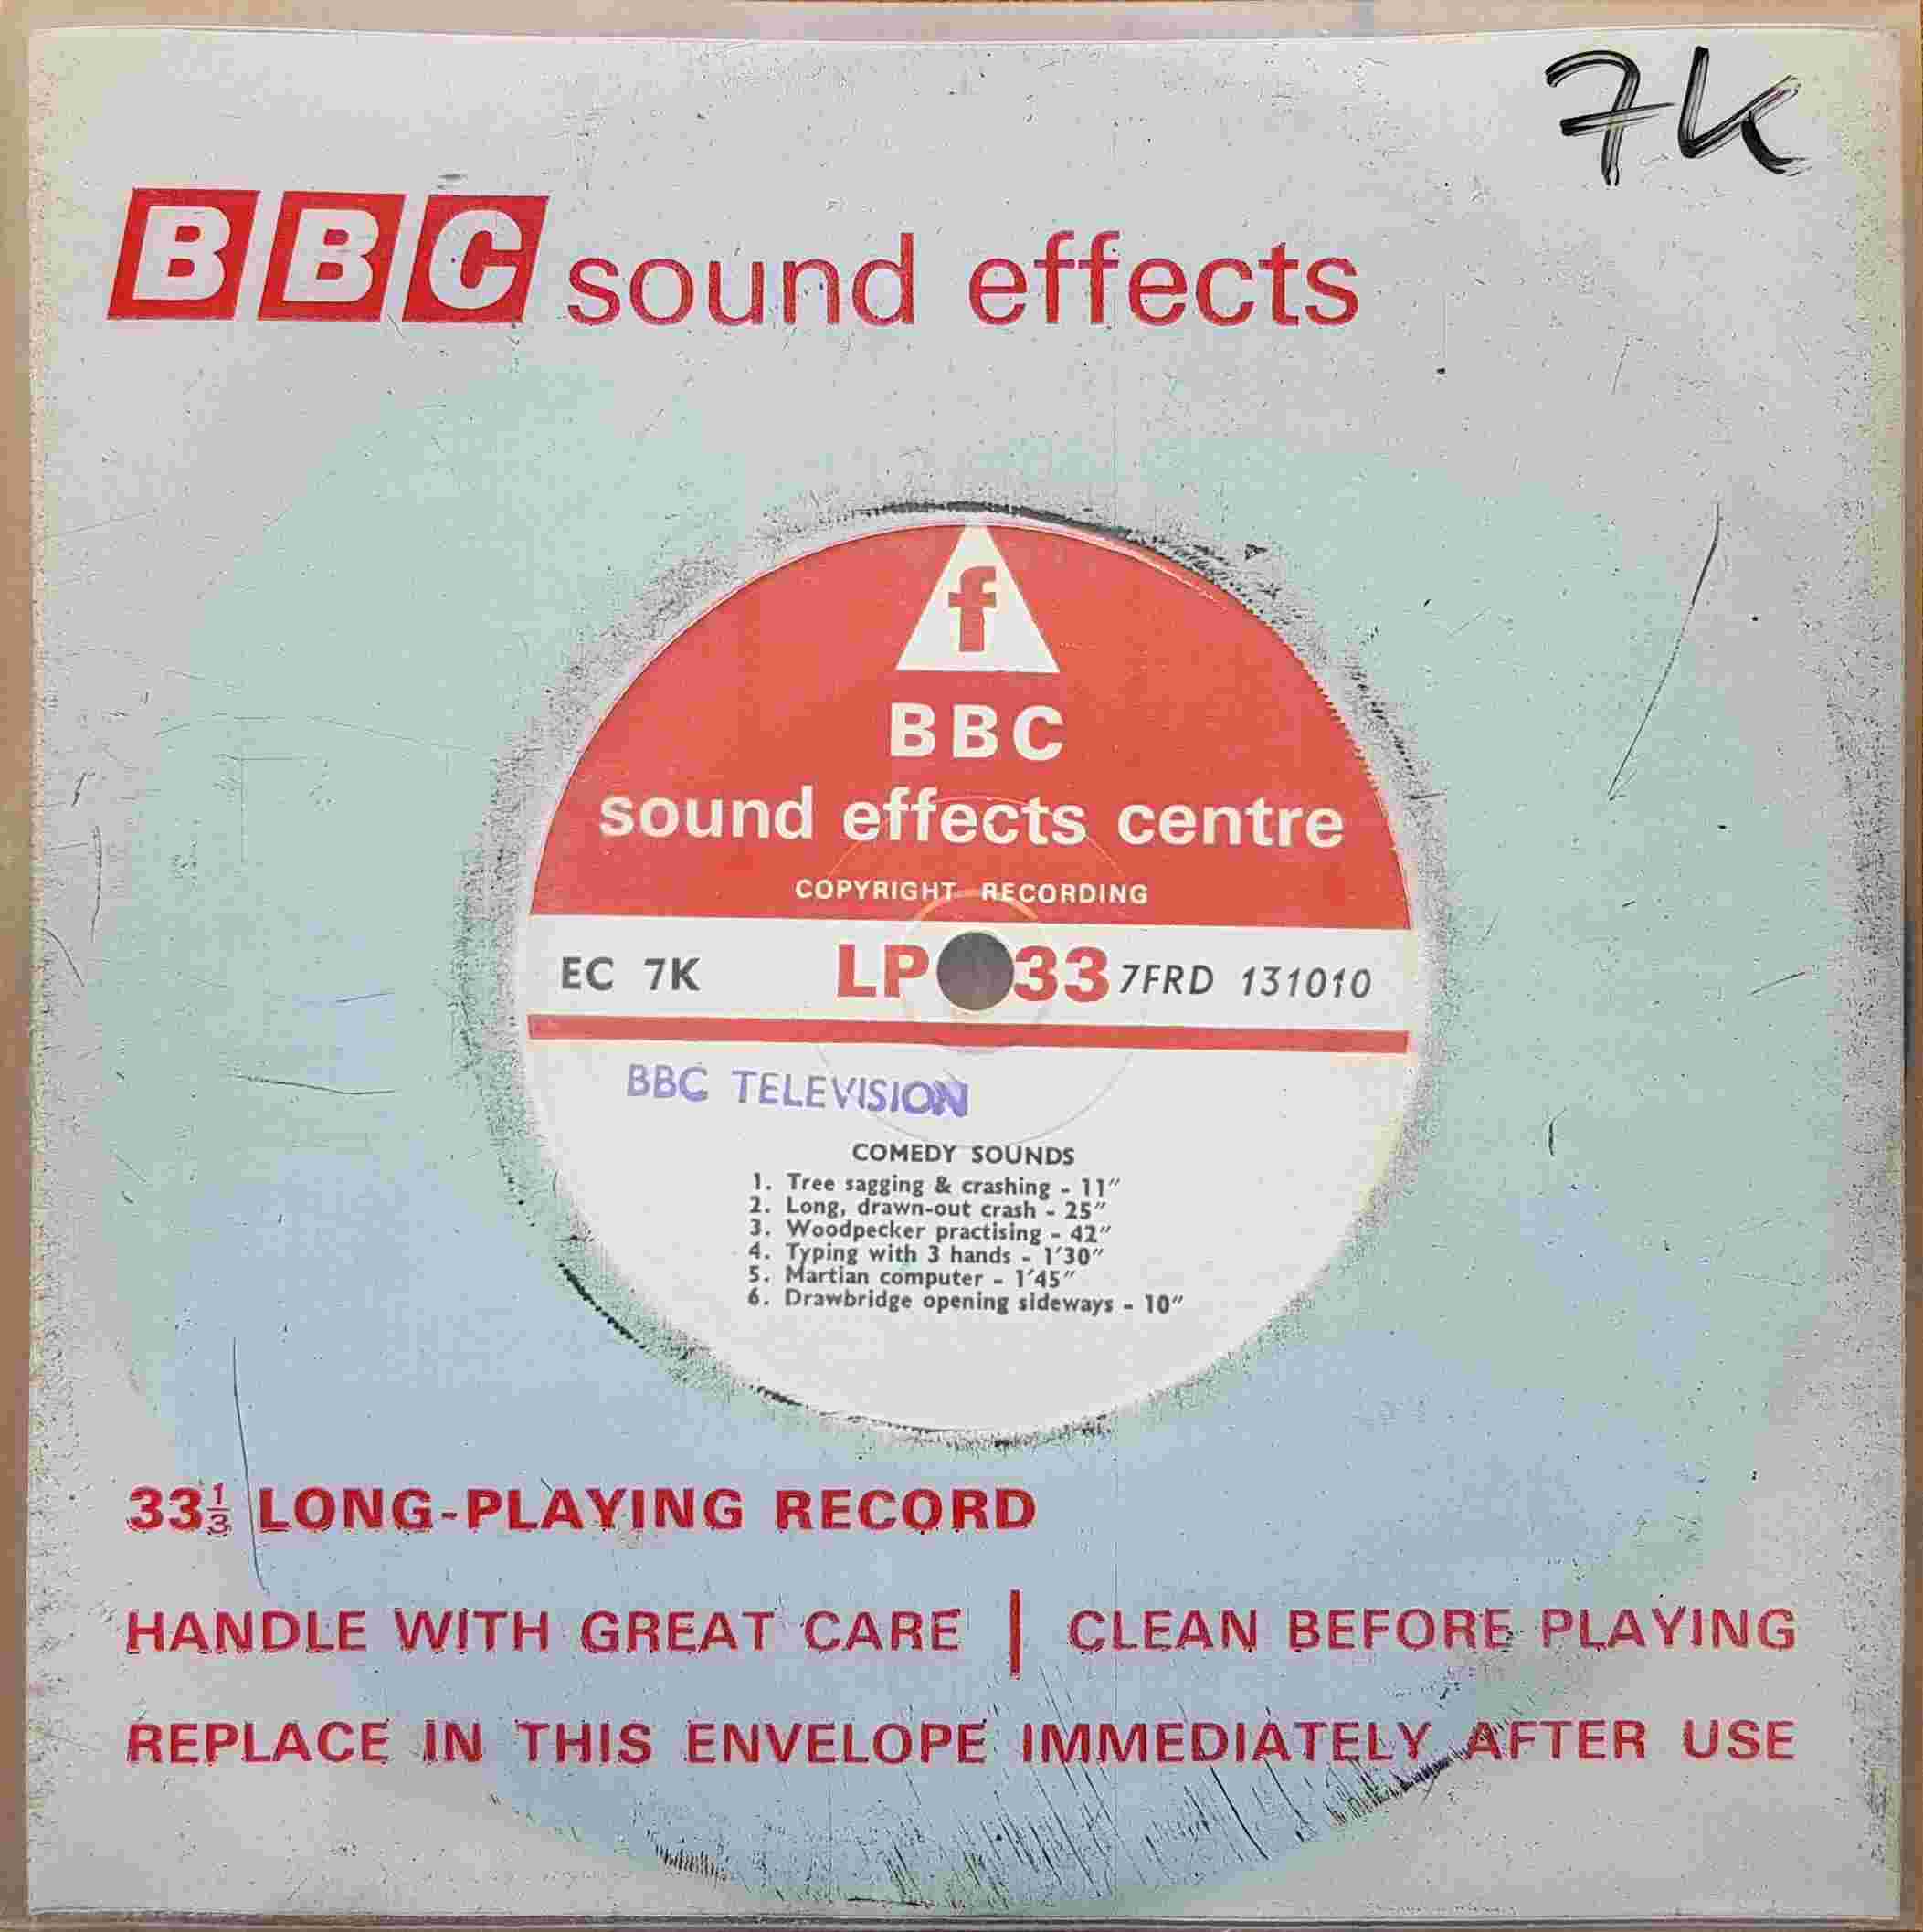 Picture of EC 7K Comedy sounds by artist Not registered from the BBC singles - Records and Tapes library